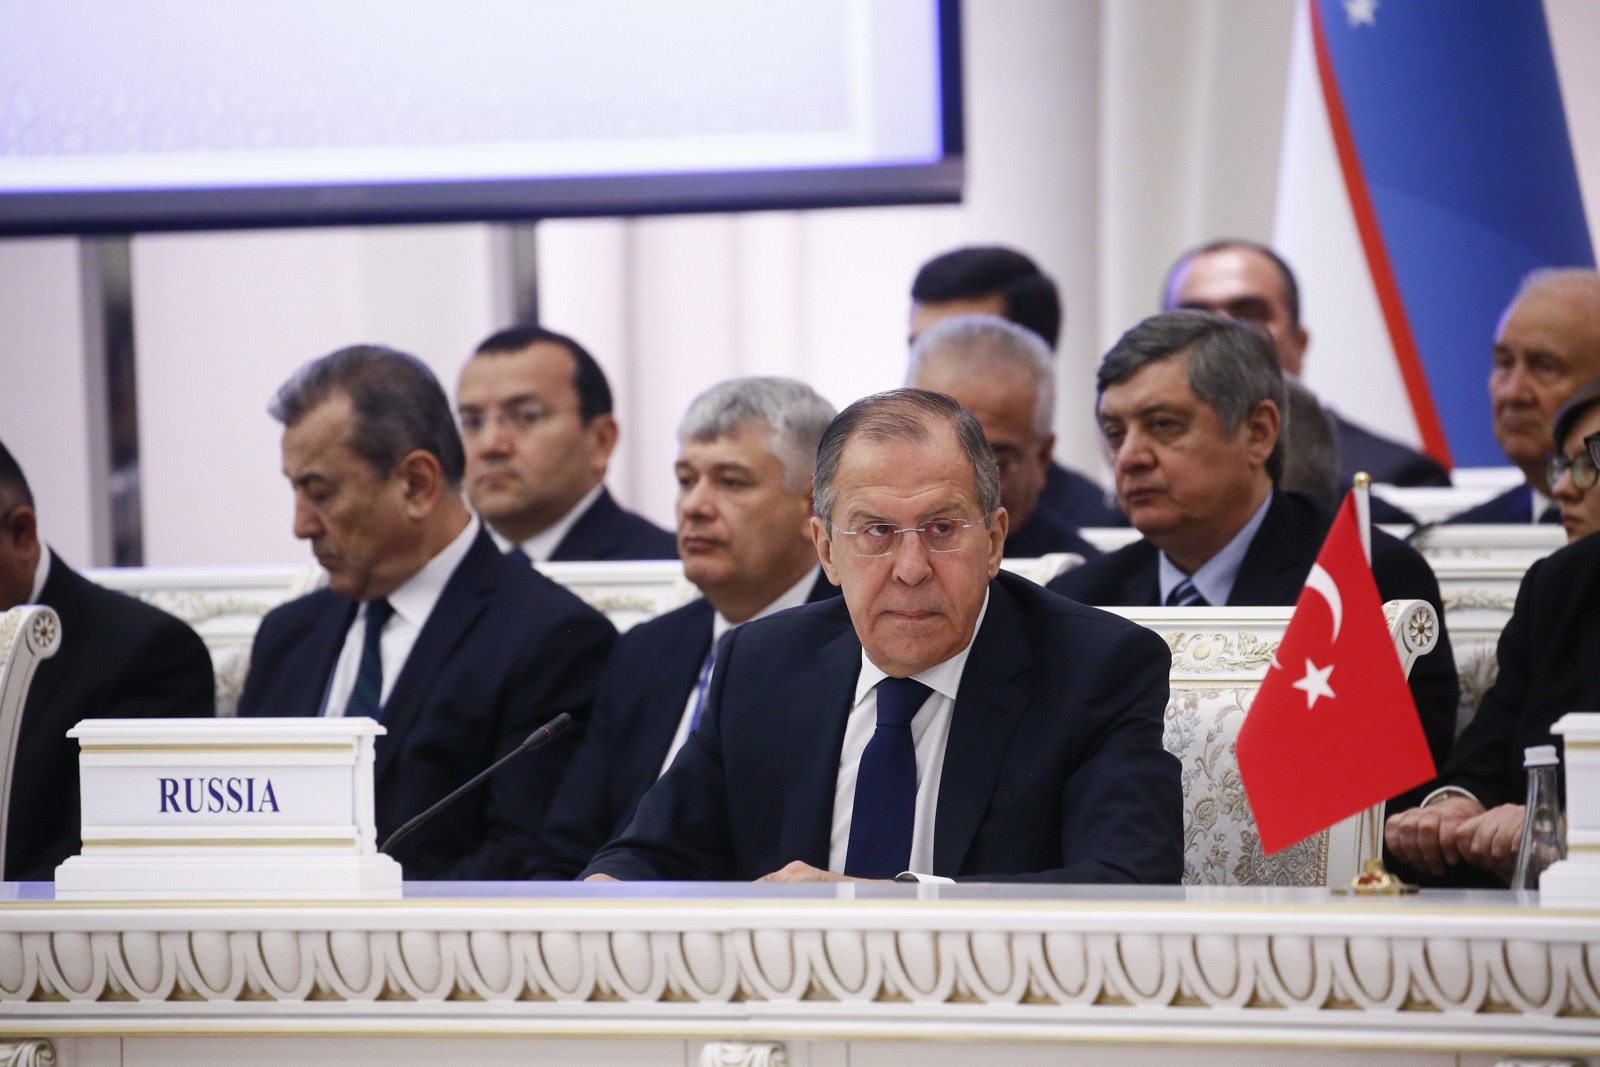 Russian Foreign Minister Sergey Lavrov at Tashkent Conference on Afghanistan has said that Afghan conflict cannot be resolved by force rather through constructive dialogue between Afghan government and Taliban